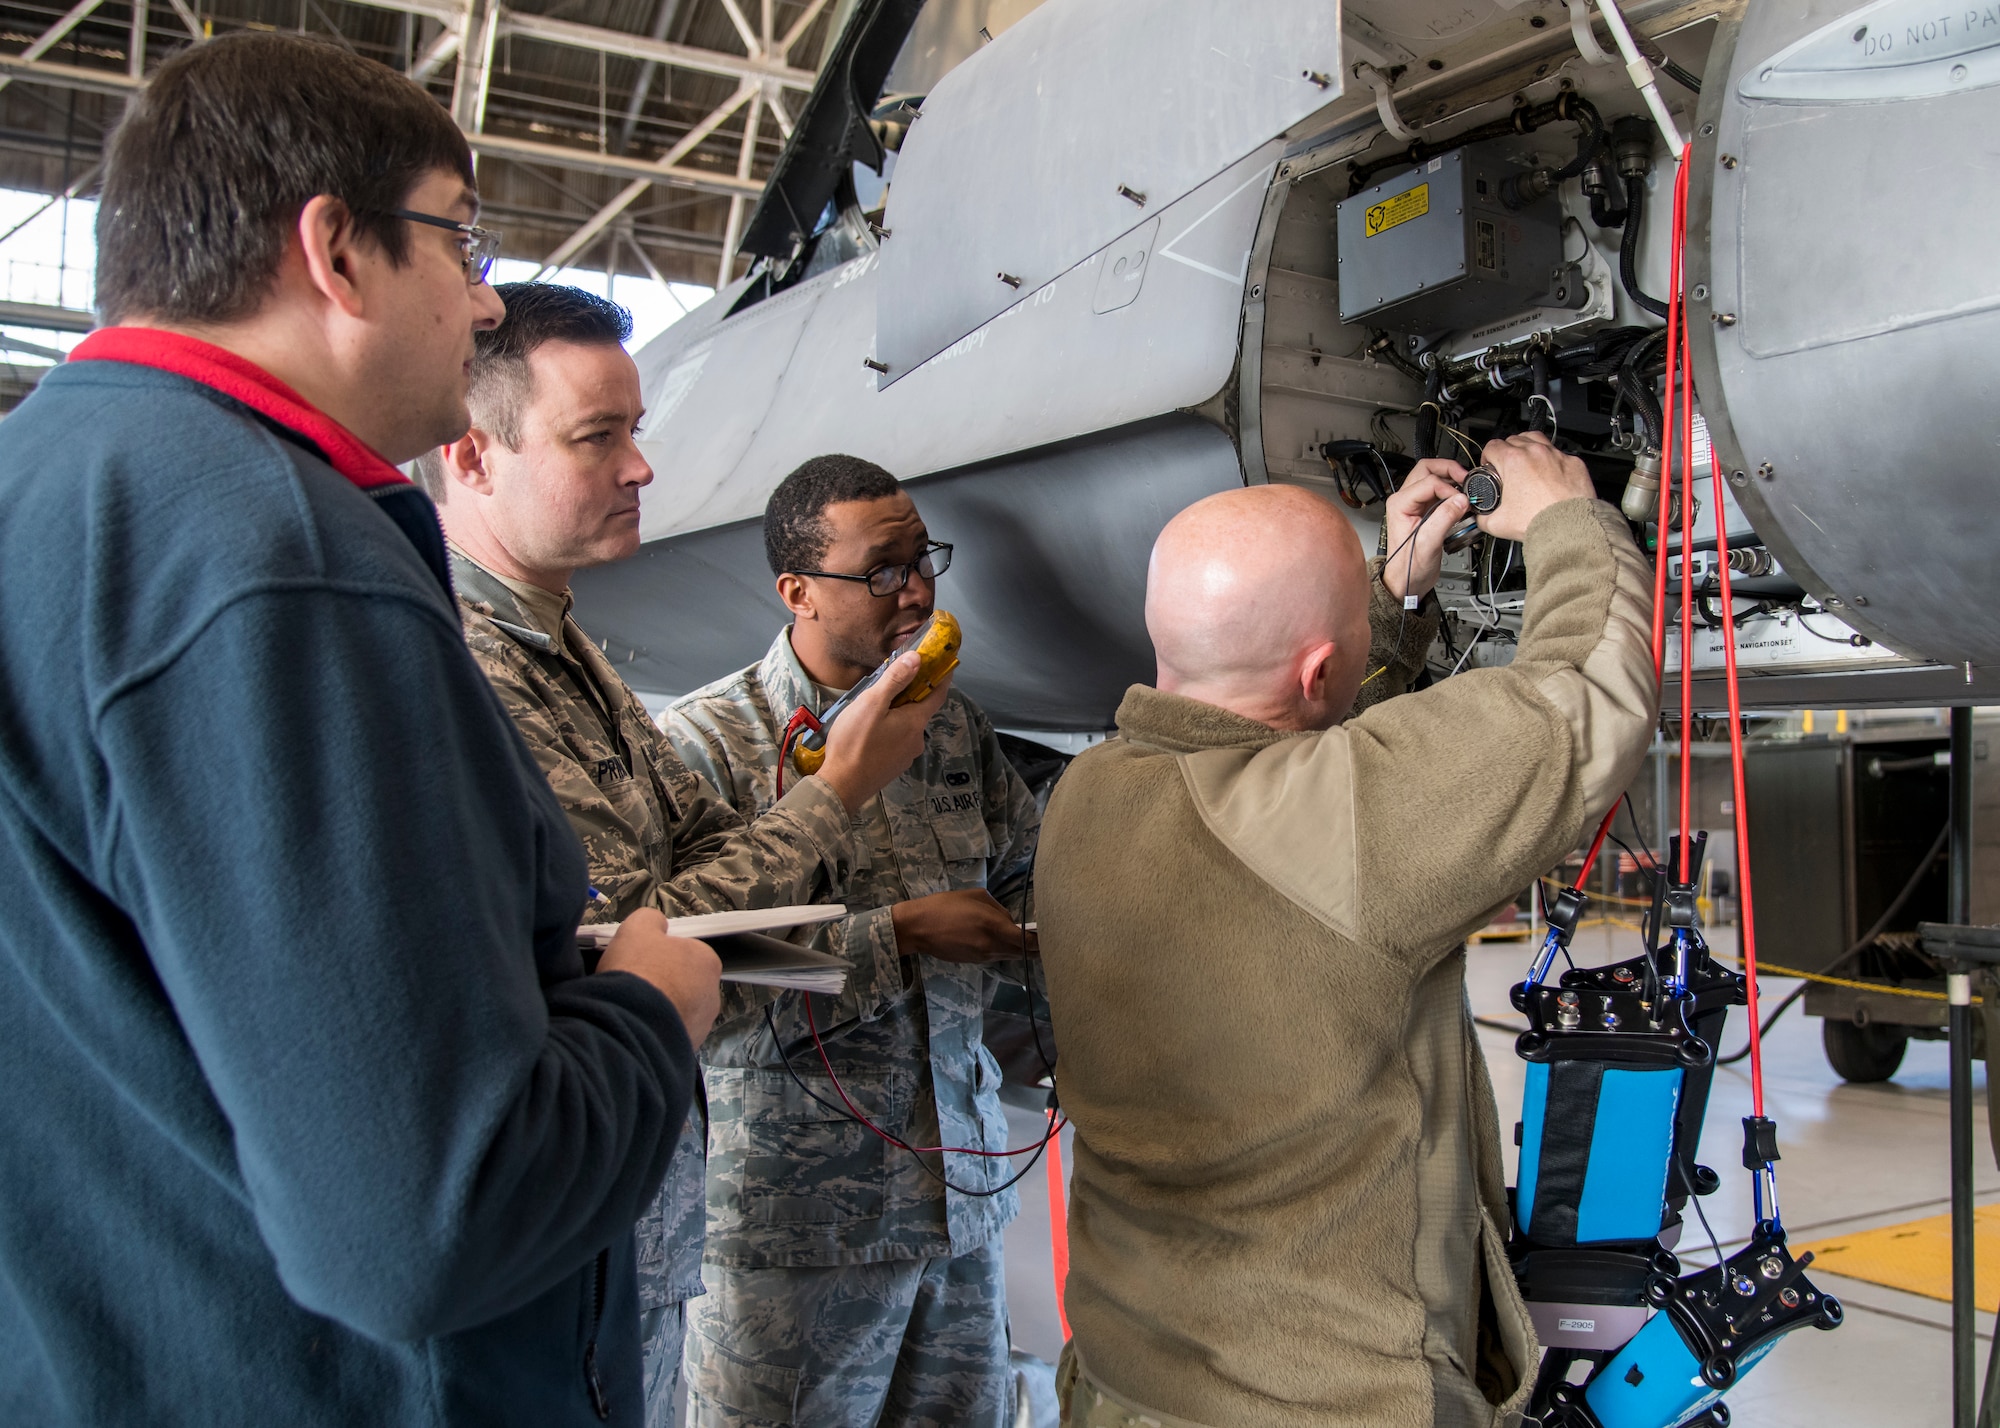 Martin Leduc, Technologies Harness Scanner engineer, Tech. Sgt. Charles Prince, 412th Logistics Test Squadron, Staff Sgt. Marcell Pemberton, 412th MXLS, and Staff Sgt. Jocko Hammond, 412th Aircraft Maintenance Squadron, gather baseline readings from an F-16 avionics wire bundle using a hand-held multi-meter at Edwards Air Force Base, California, Feb. 4. (Photo by Giancarlo Casem)